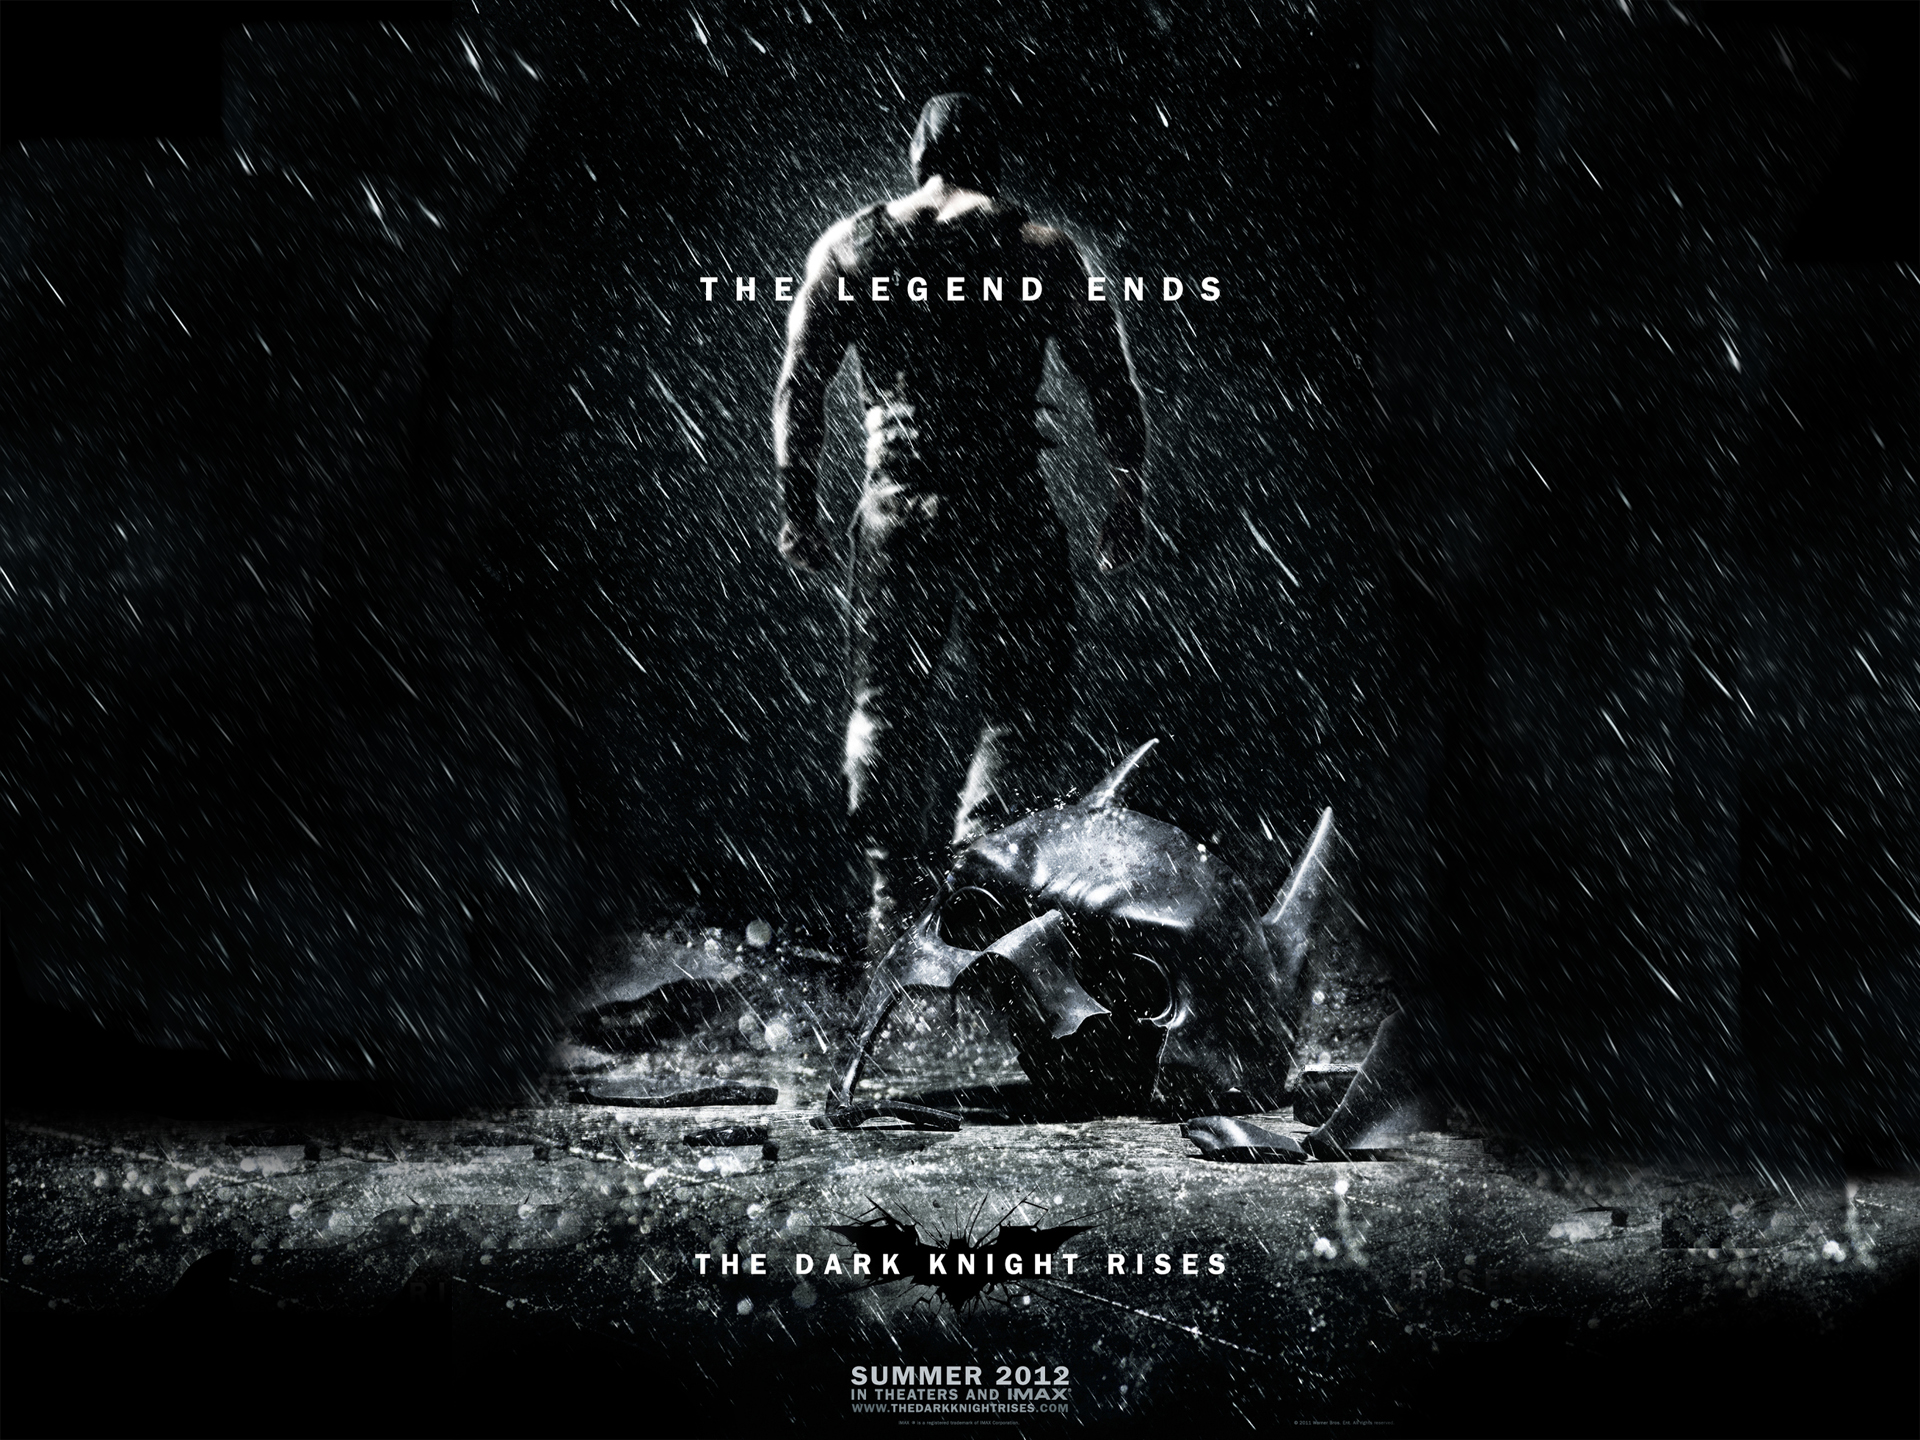 The Dark Knight Rises Two Exclusive Wallpaper And New Poster